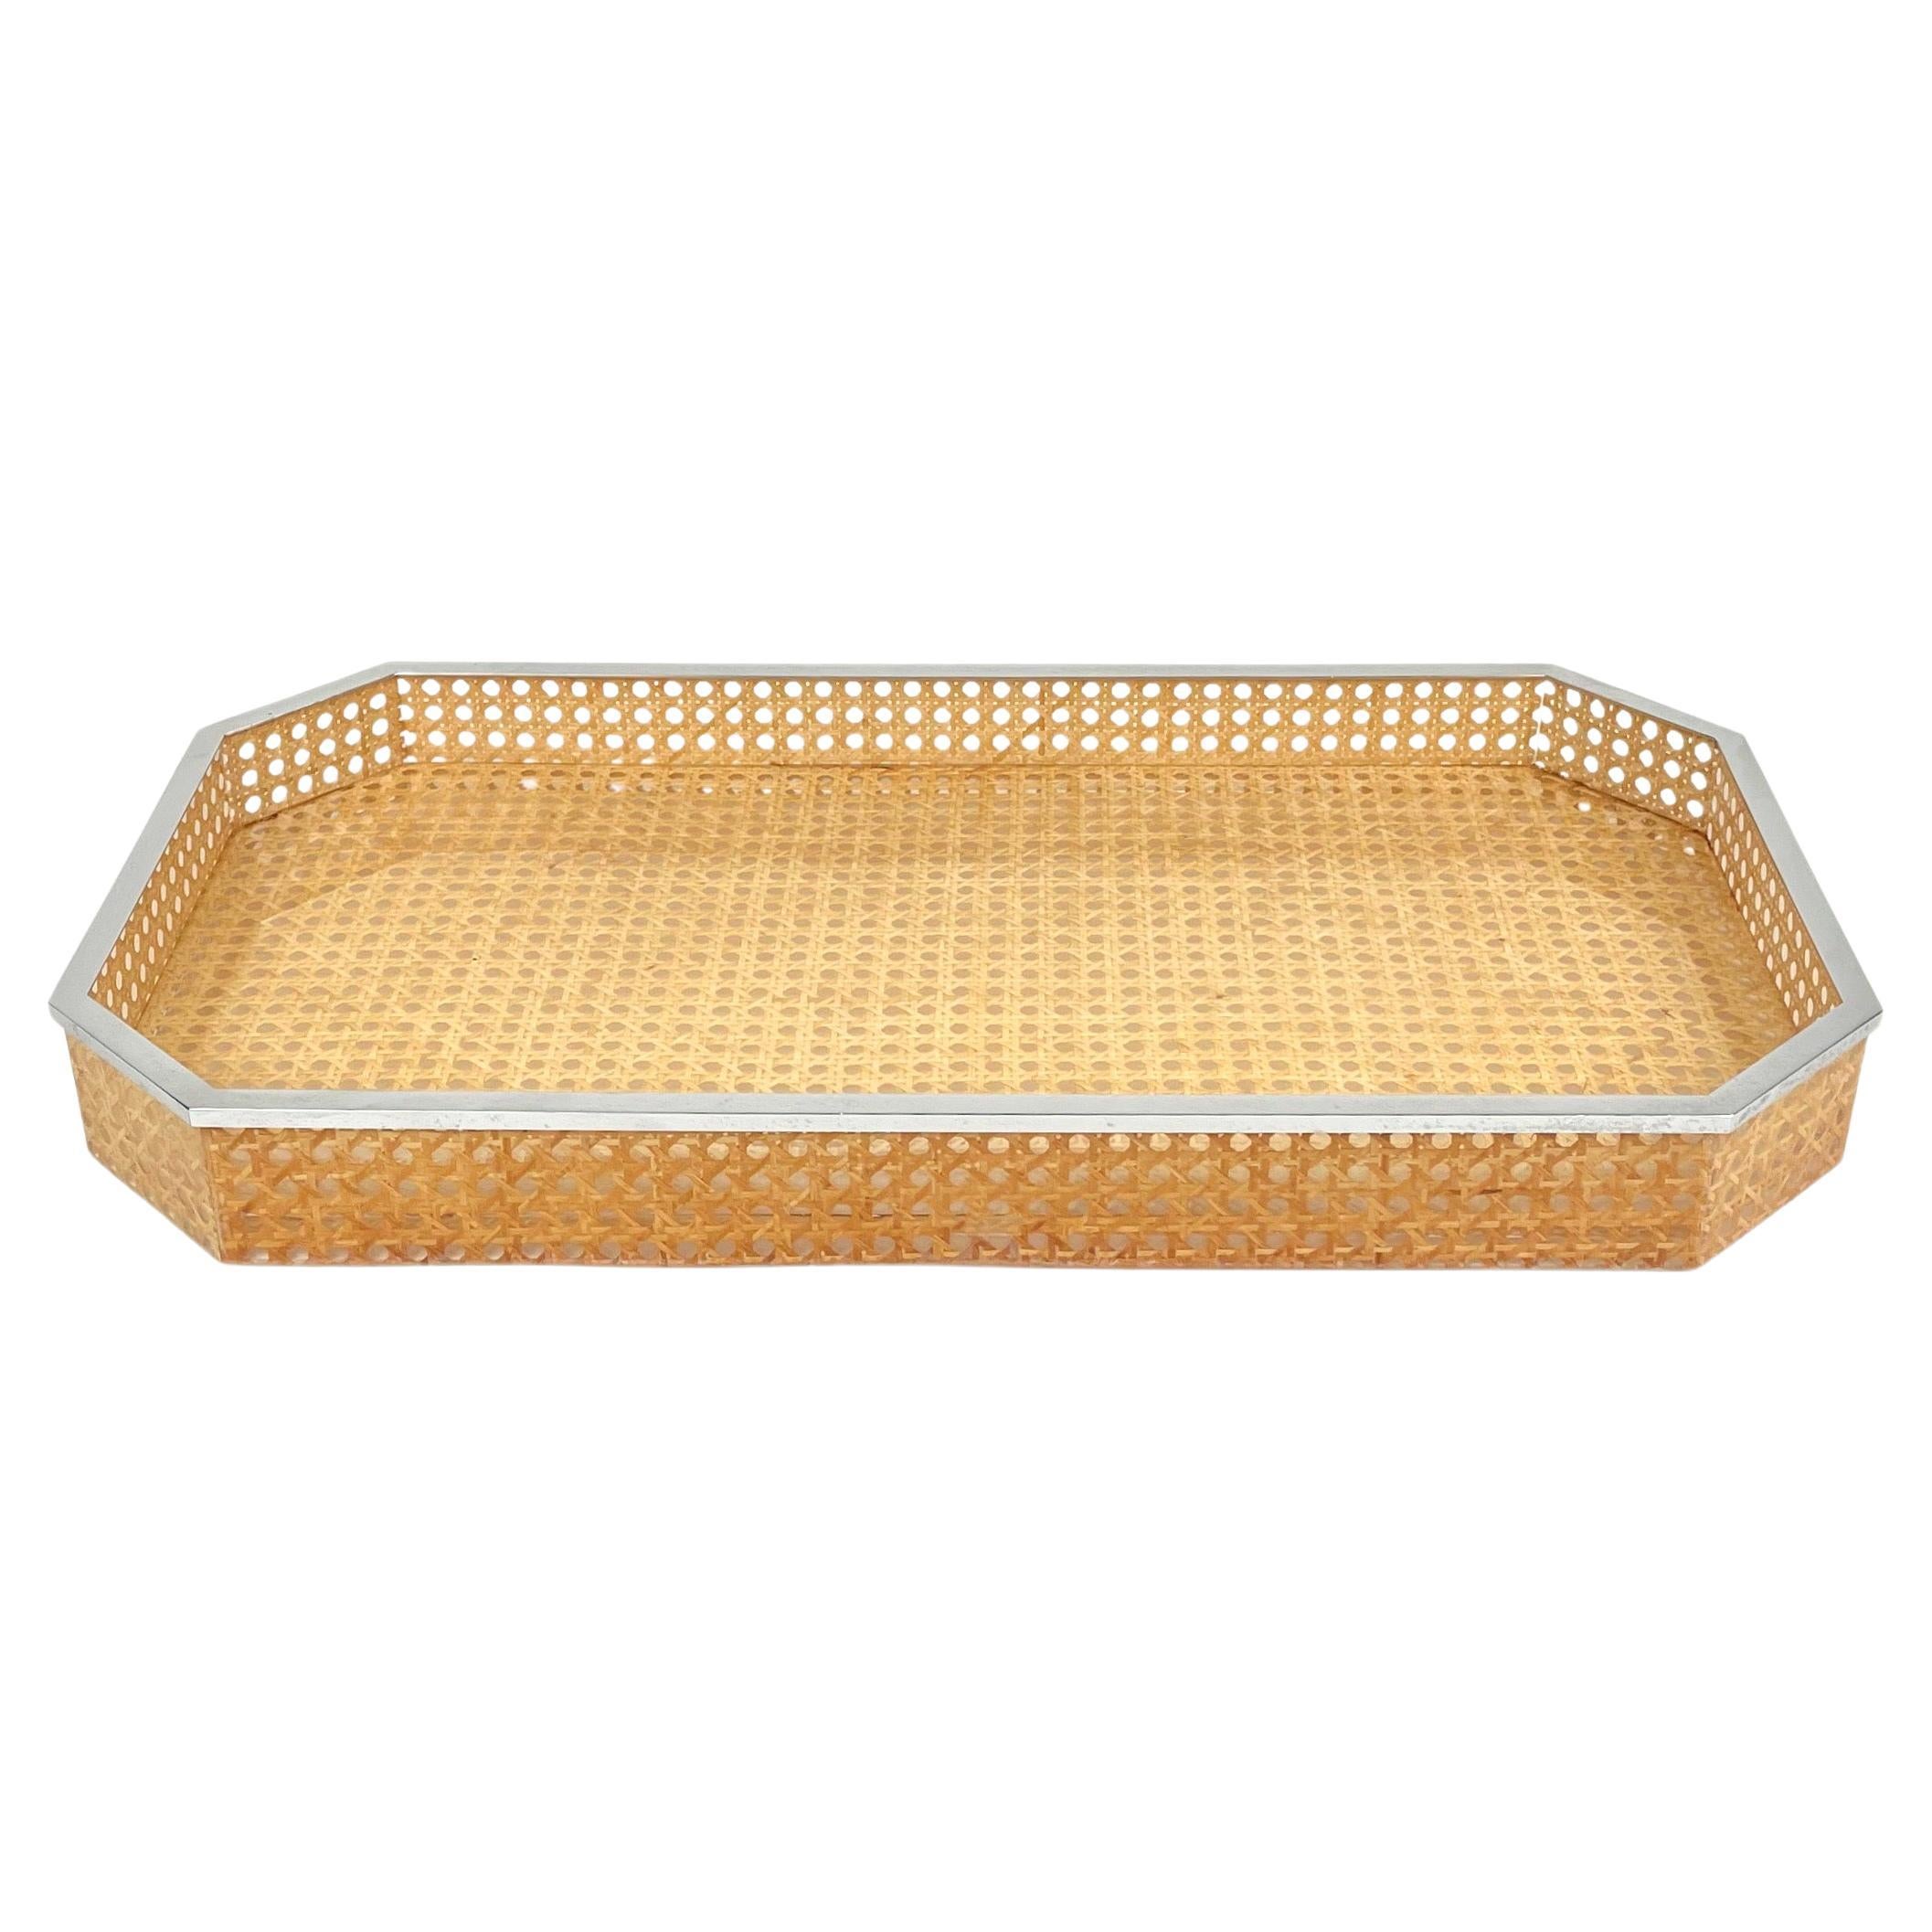 Centerpiece Tray Lucite, Rattan & Chrome Christian Dior Style, Italy, 1970s